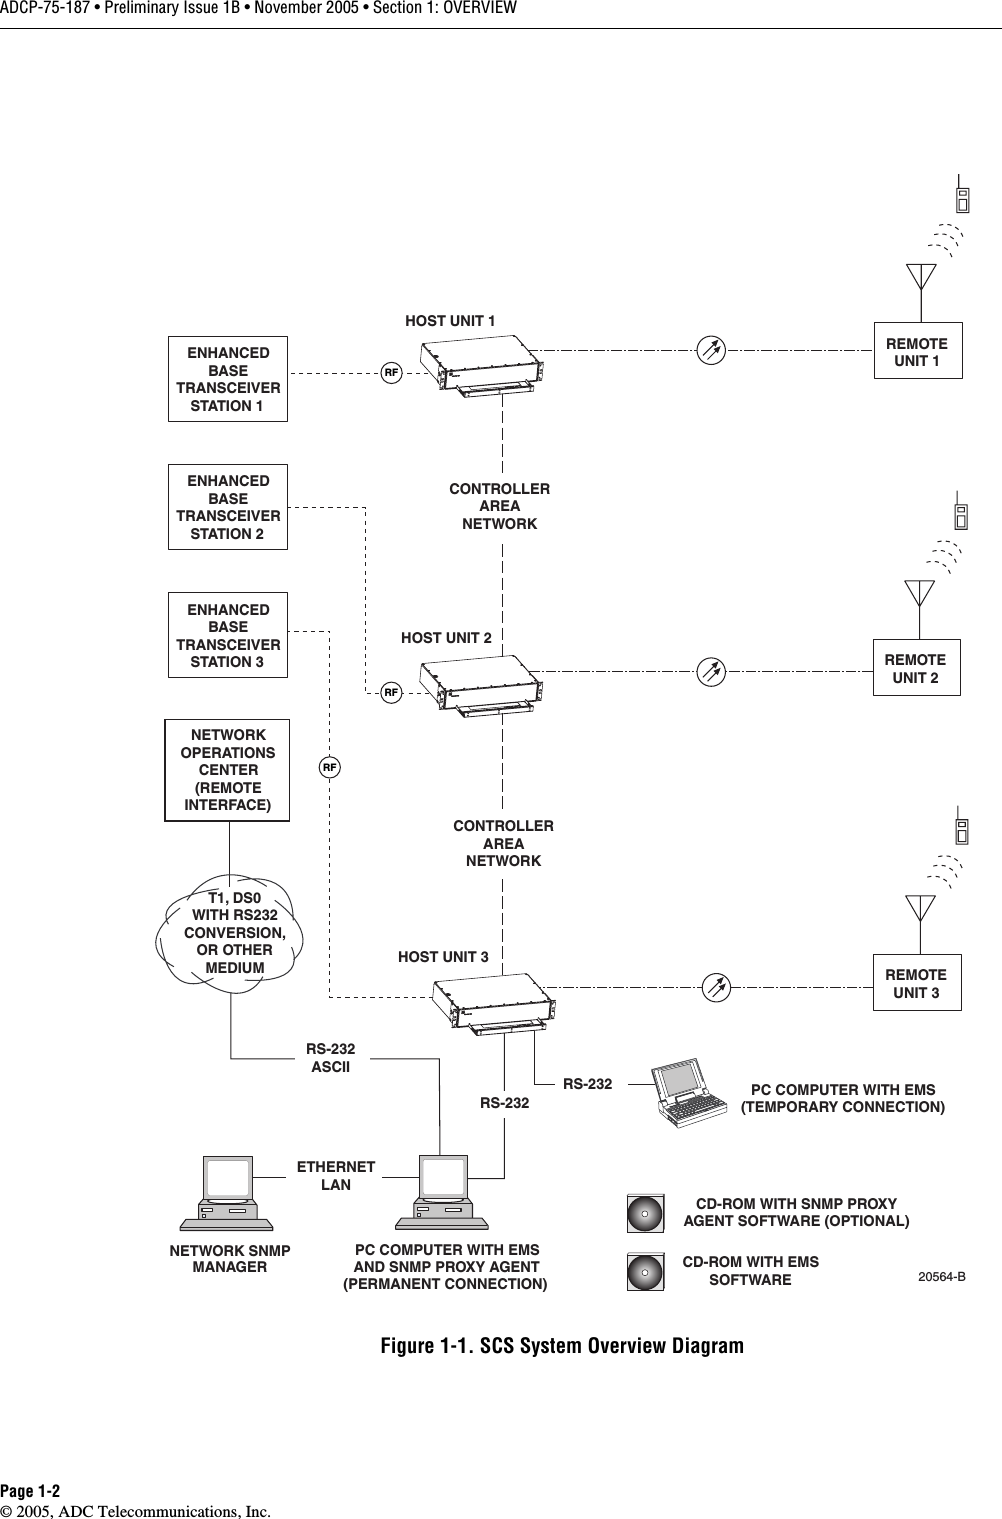 ADCP-75-187 • Preliminary Issue 1B • November 2005 • Section 1: OVERVIEWPage 1-2© 2005, ADC Telecommunications, Inc.Figure 1-1. SCS System Overview DiagramHOST UNIT 1HOST UNIT 2HOST UNIT 3NETWORKOPERATIONSCENTER(REMOTEINTERFACE)CONTROLLERAREANETWORK20564-BRFRFRFCONTROLLERAREANETWORKREMOTEUNIT 1REMOTEUNIT 3REMOTEUNIT 2PC COMPUTER WITH EMSAND SNMP PROXY AGENT(PERMANENT CONNECTION) RS-232ASCIIRS-232CD-ROM WITH EMSSOFTWARENETWORK SNMPMANAGERCD-ROM WITH SNMP PROXYAGENT SOFTWARE (OPTIONAL)ETHERNETLANPC COMPUTER WITH EMS(TEMPORARY CONNECTION)T1, DS0WITH RS232CONVERSION,OR OTHERMEDIUMRS-232ENHANCEDBASETRANSCEIVERSTATION 1ENHANCEDBASETRANSCEIVERSTATION 2ENHANCEDBASETRANSCEIVERSTATION 3